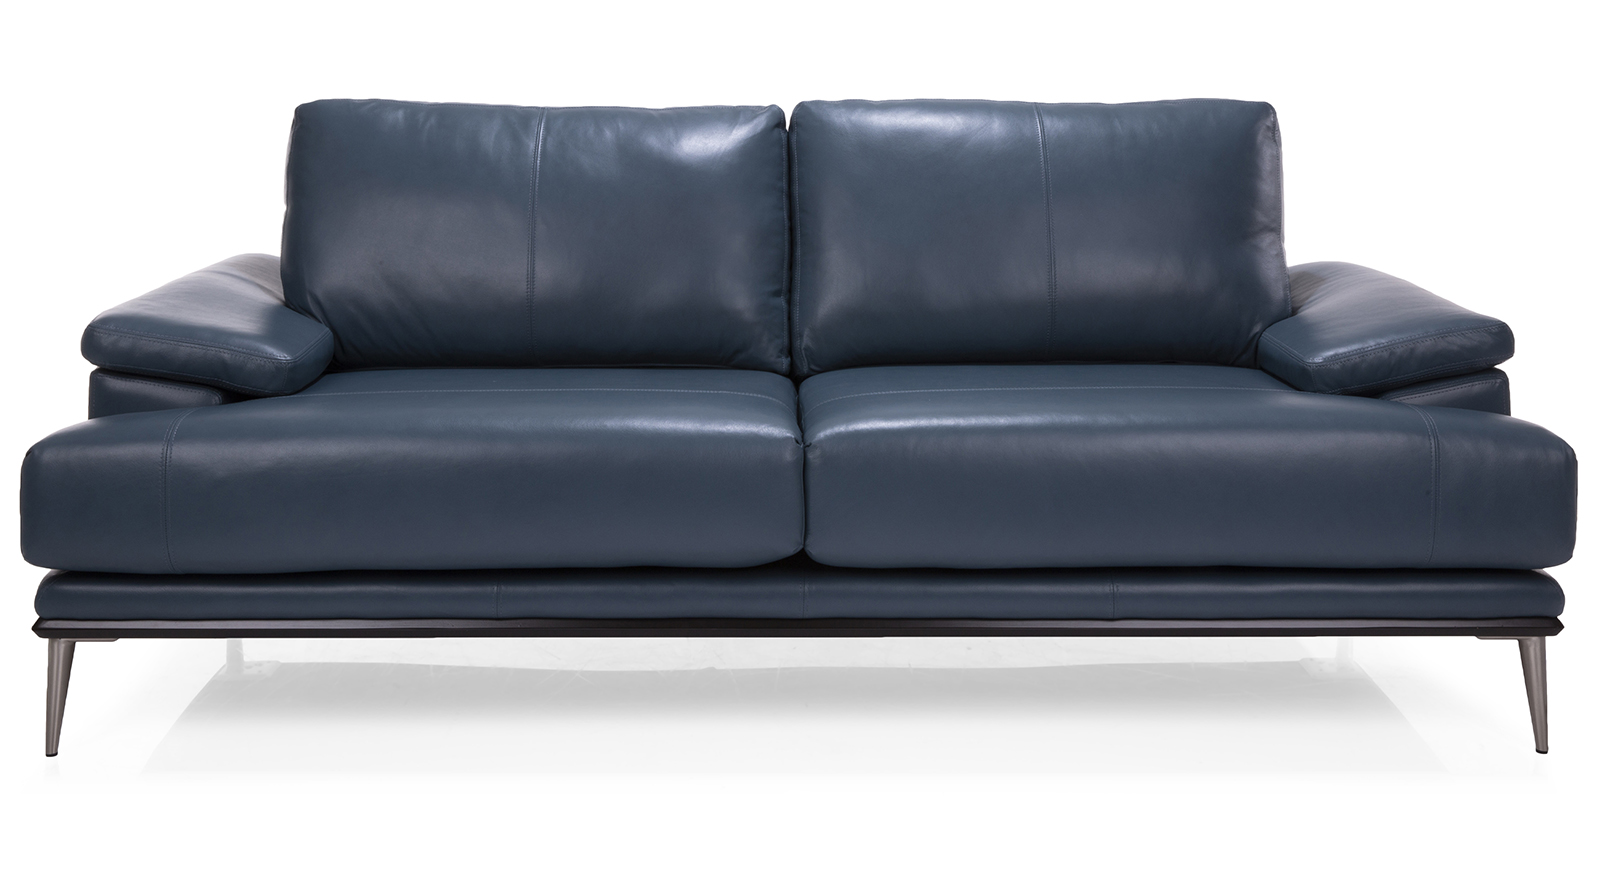 3227-01_Sofa_front_view